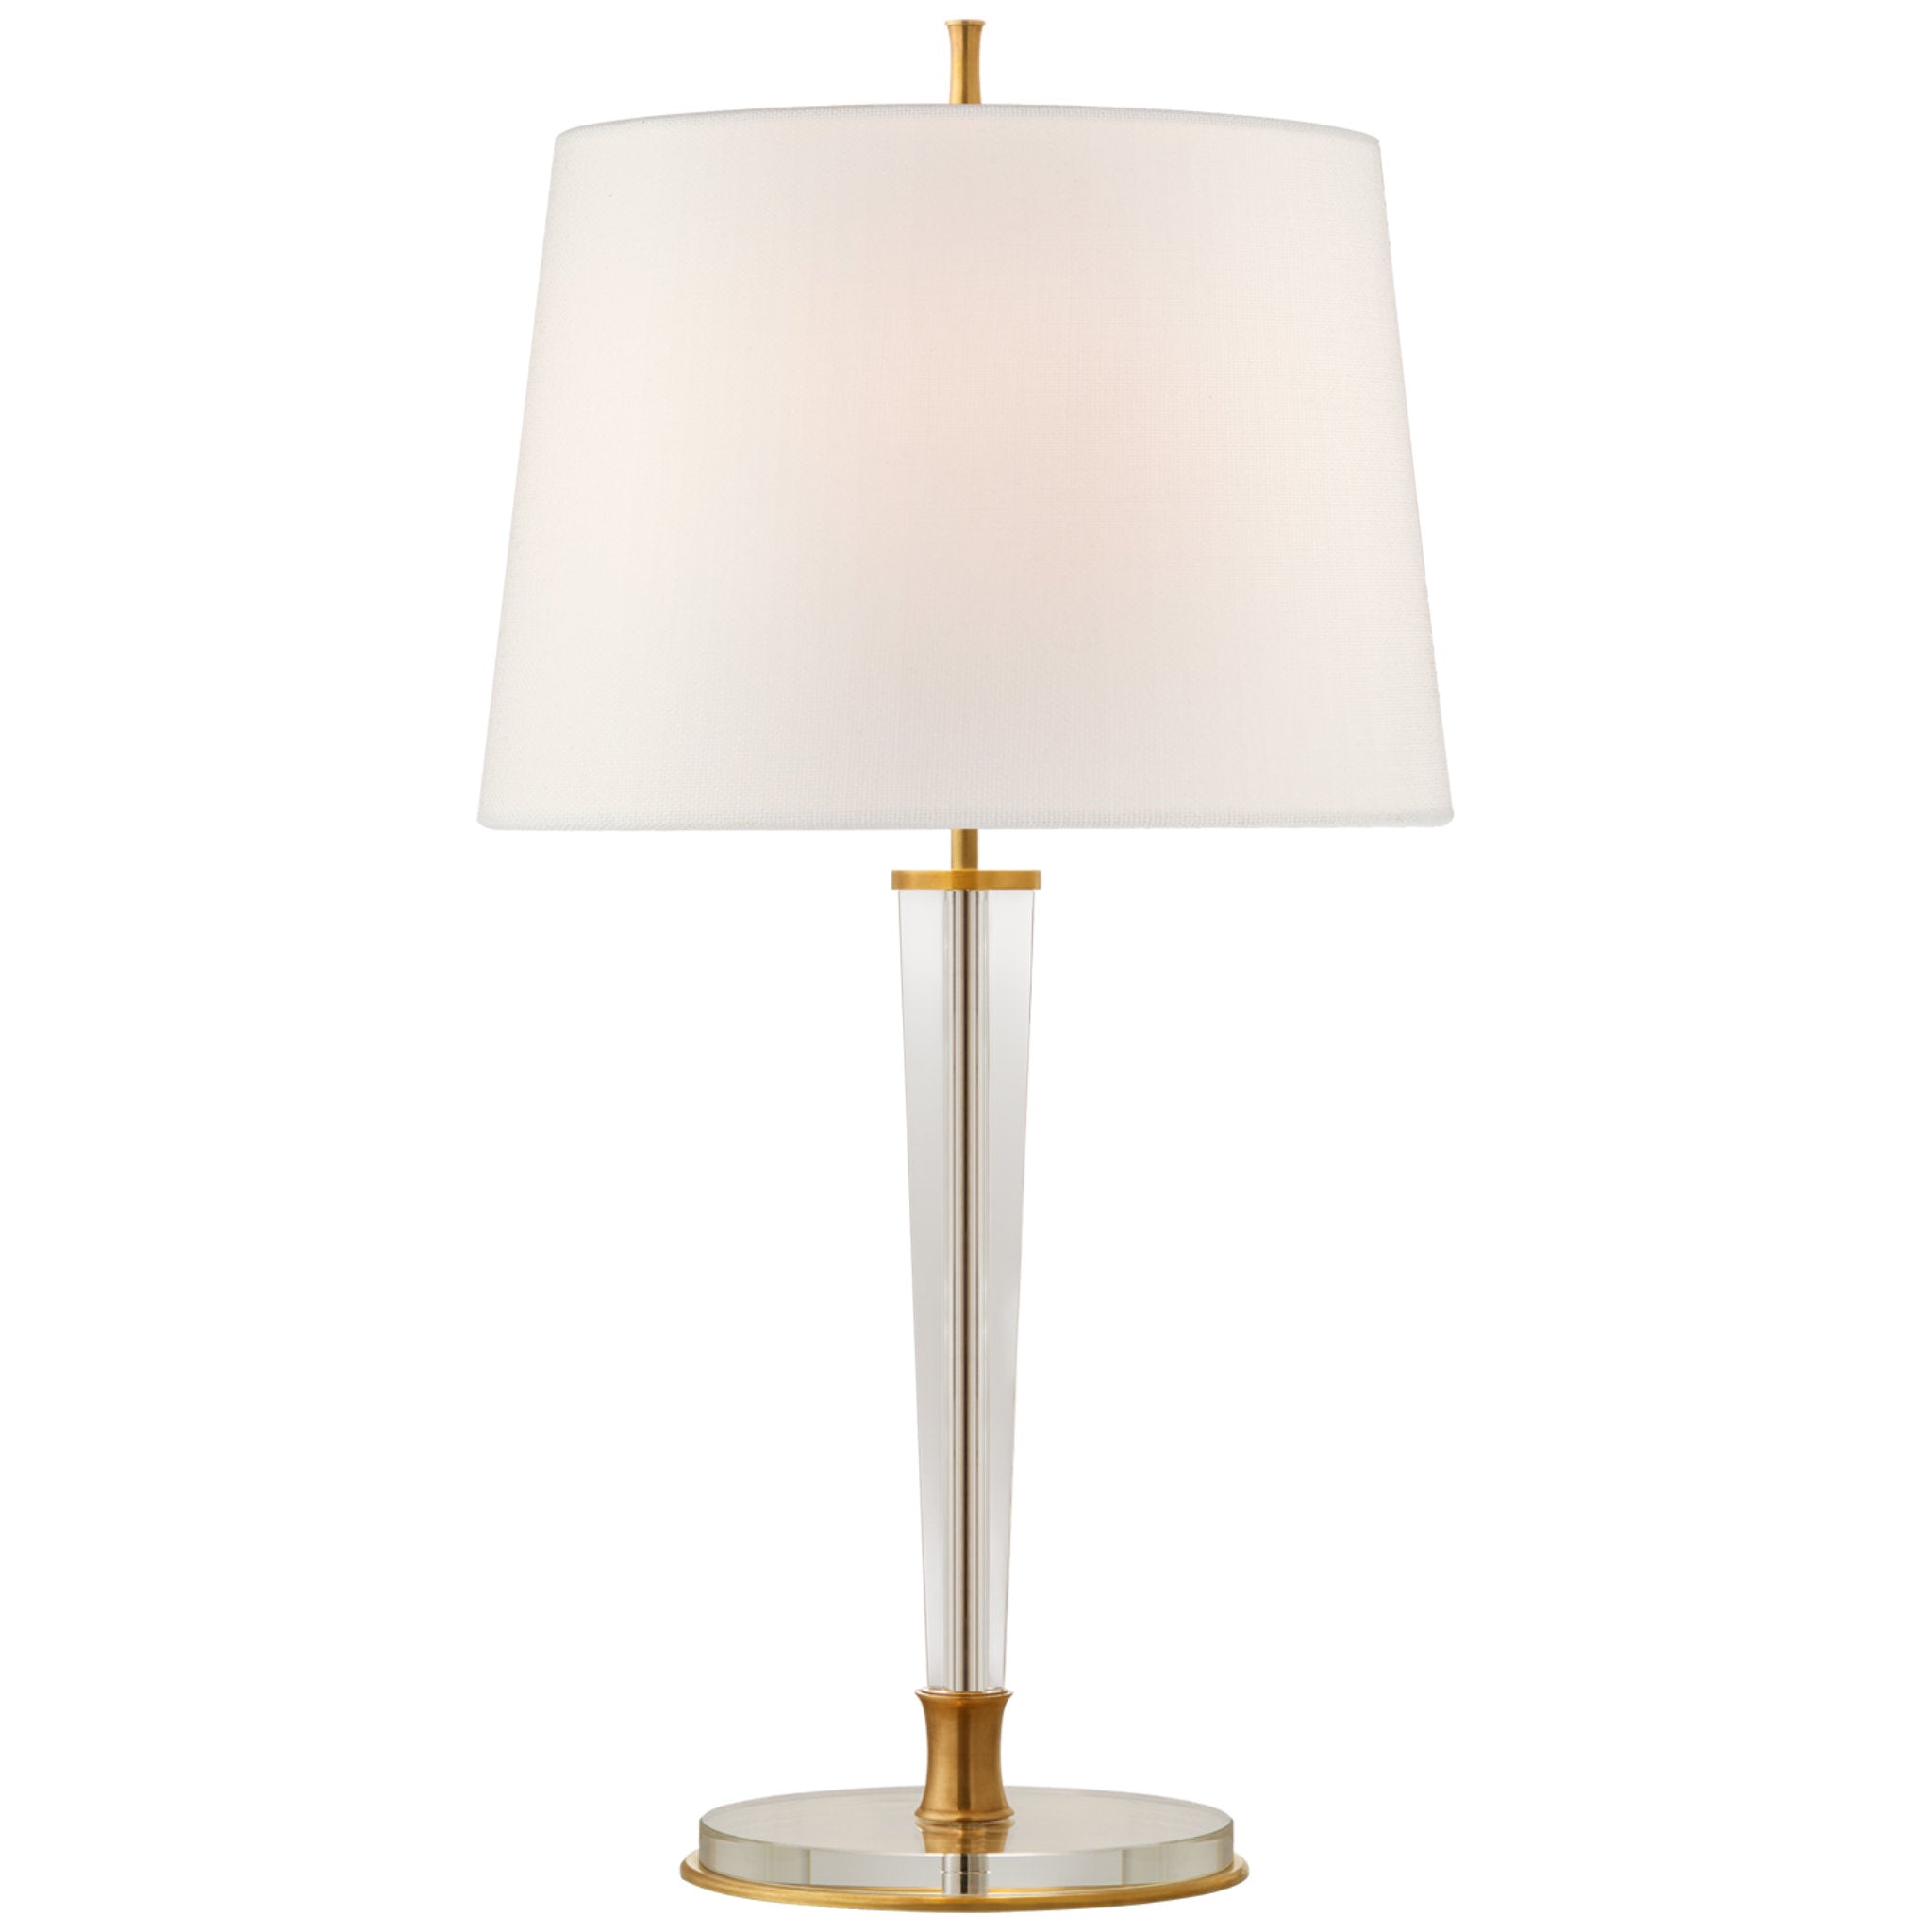 Thomas O'Brien Lyra Large Table Lamp in Hand-Rubbed Antique Brass and Crystal with Linen Shade